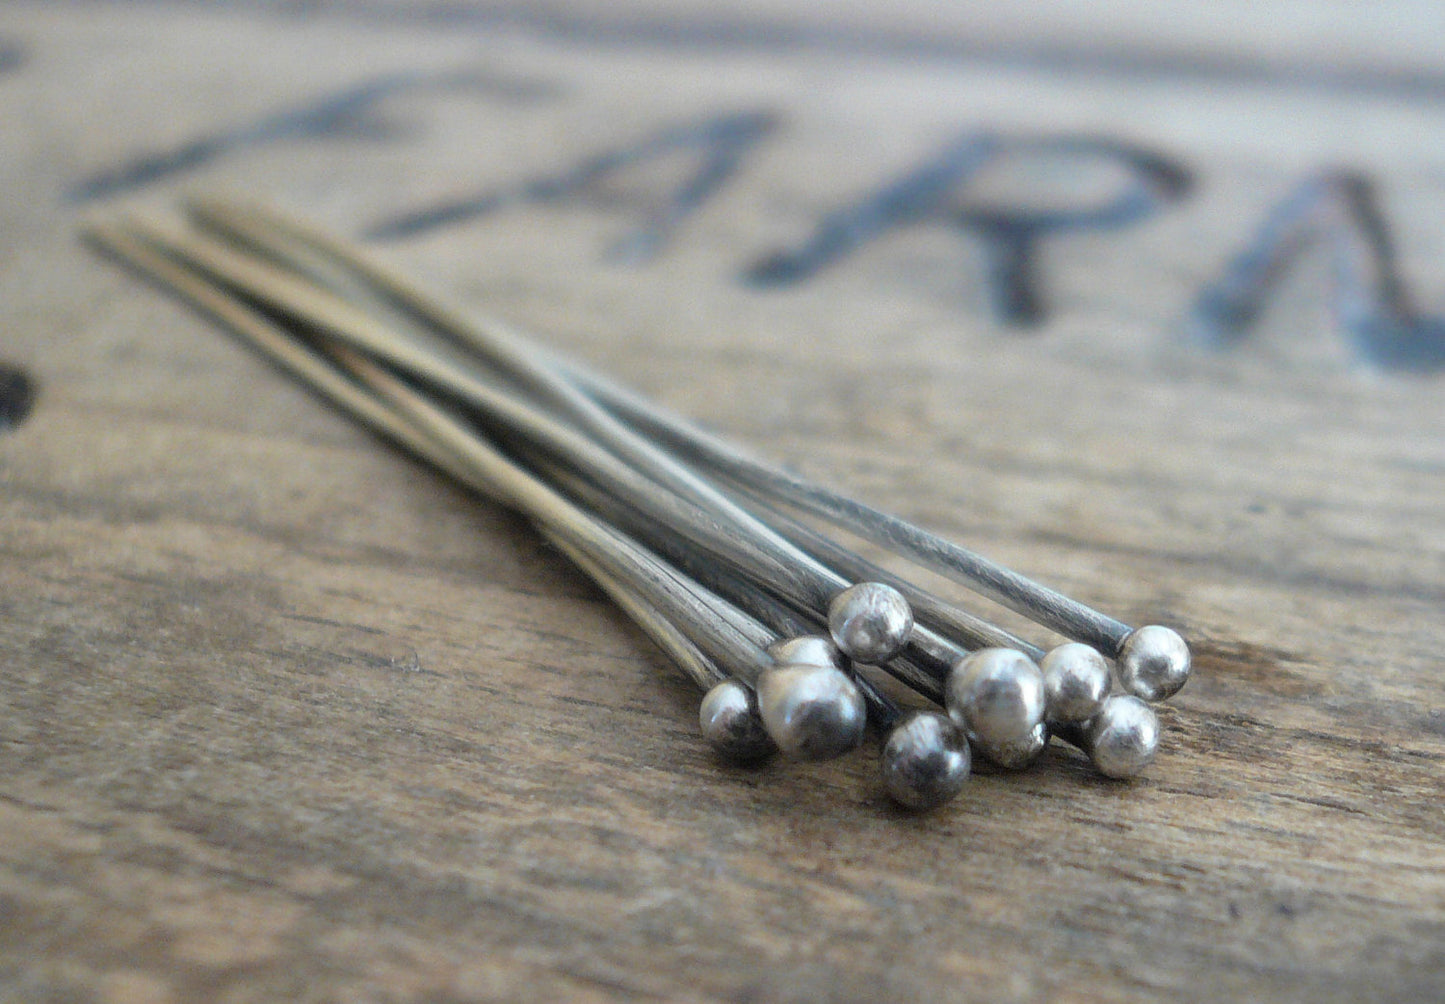 10 2" Fine Silver 24 GAUGE Handmade Ball Headpins - 2 inches. Oxidized and polished